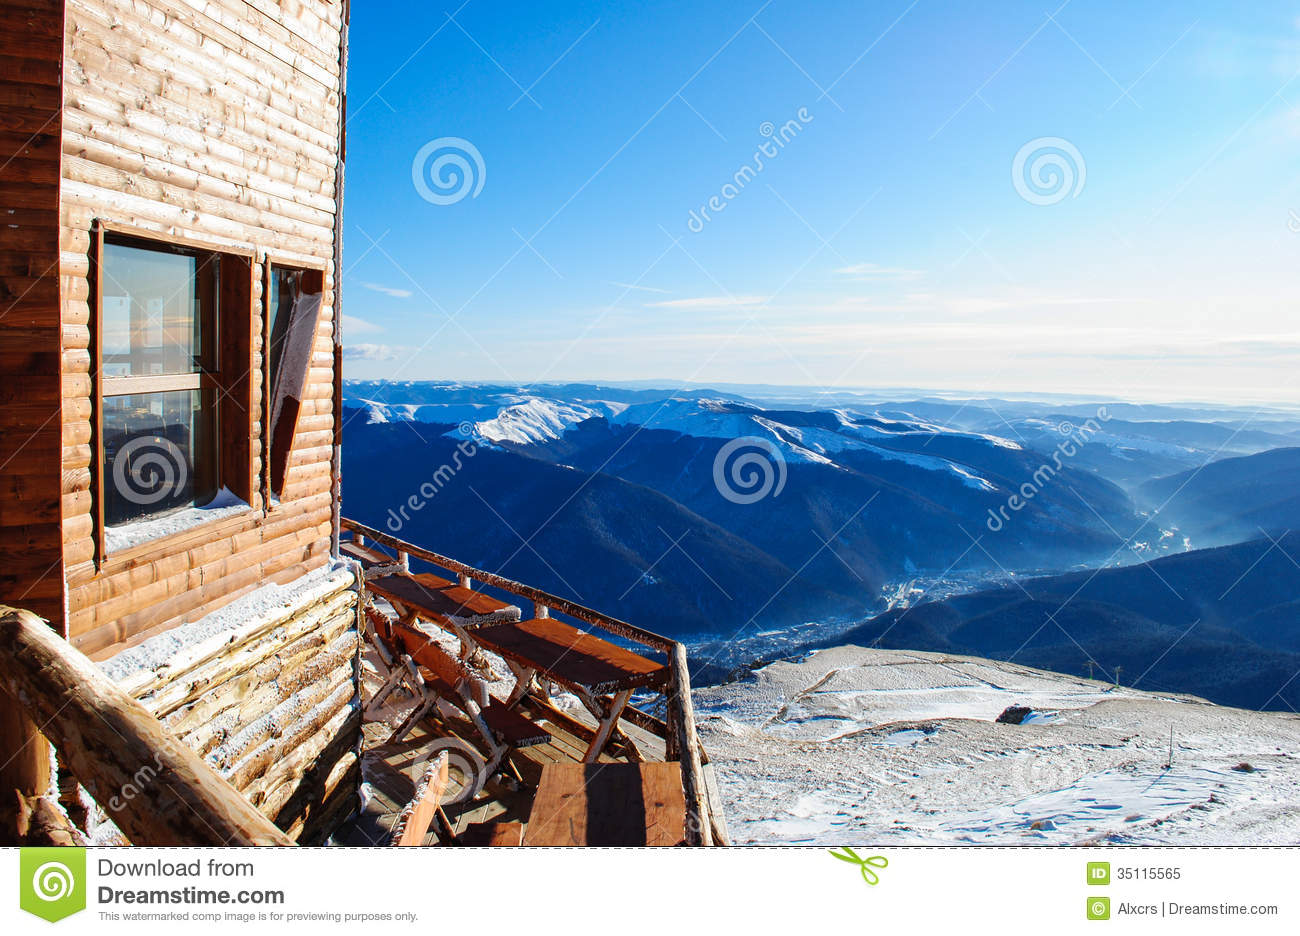 Wooden Cabin Facing The Snowy Peaks Of Mountains In The Cold Winter